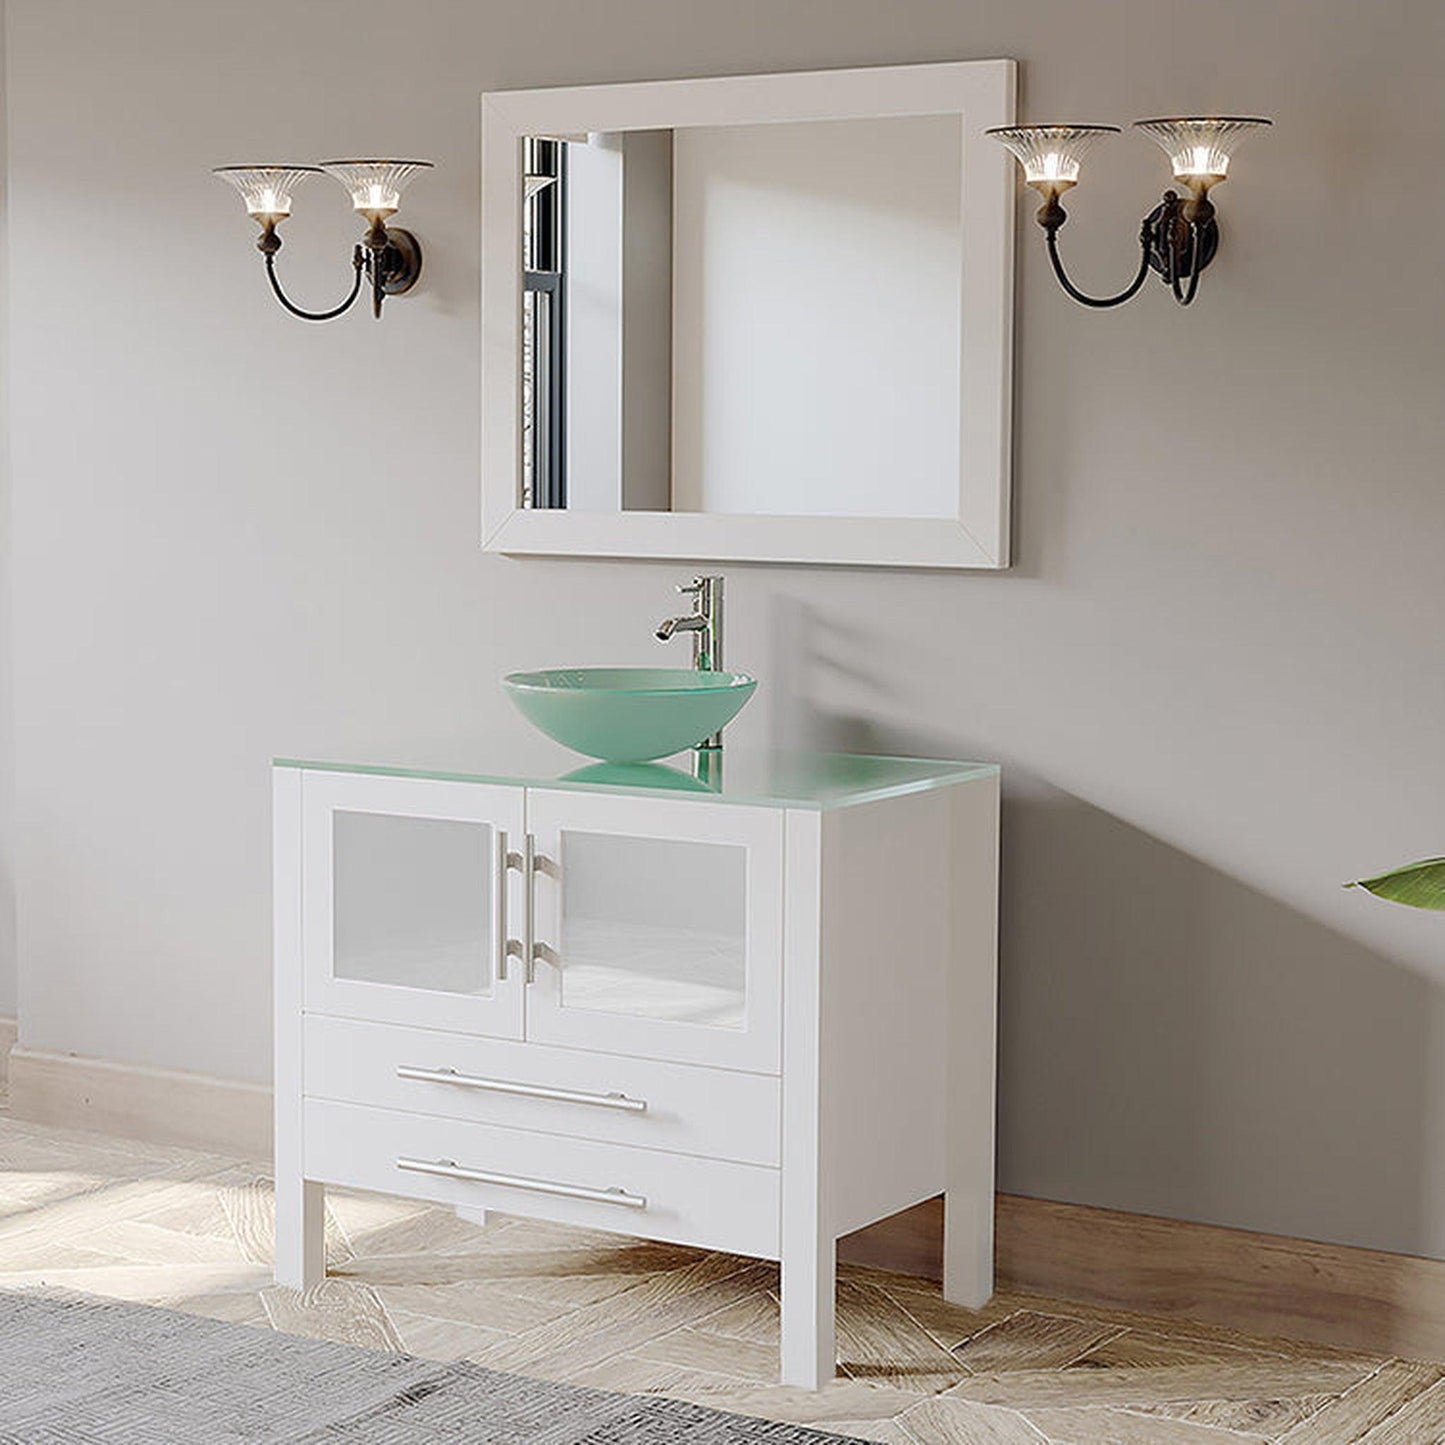 Cambridge Plumbing 36" White Wood Single Vanity Set With Tempered Glass Countertop And Circular Vessel Sink With Polished Chrome Plumbing Finish